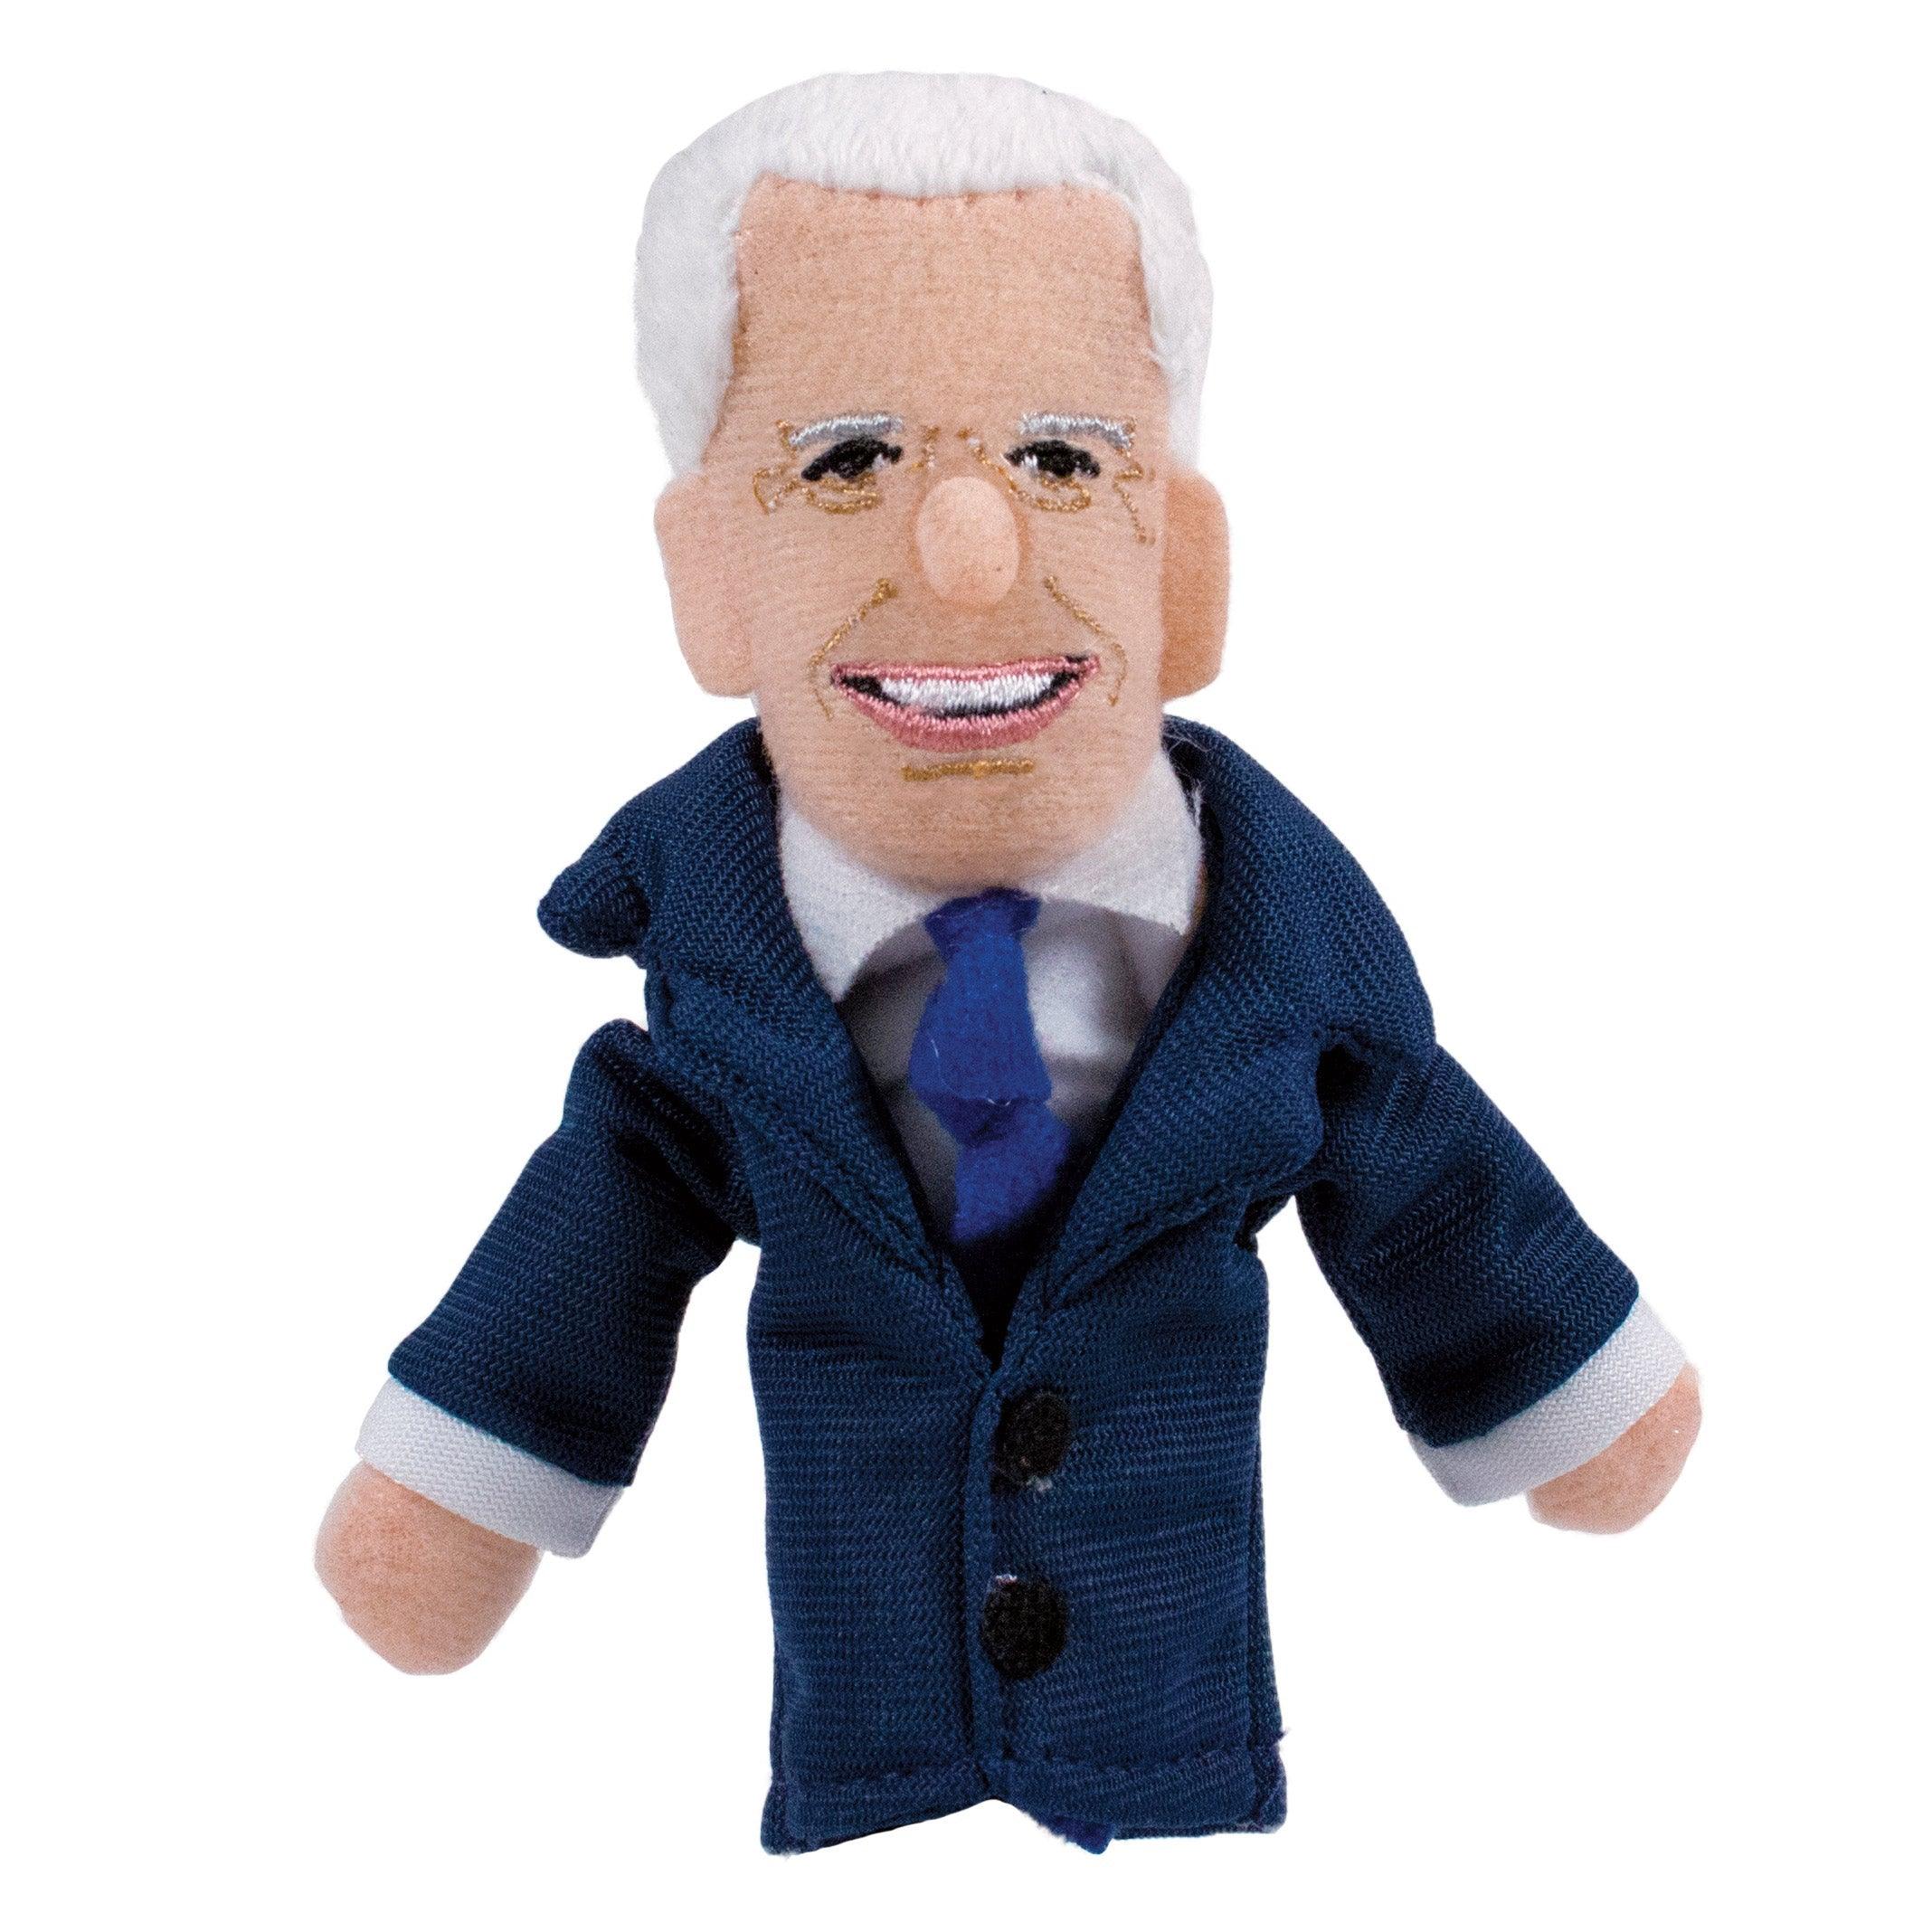 Product photo of Joe Biden Finger Puppet, a novelty gift manufactured by The Unemployed Philosophers Guild.